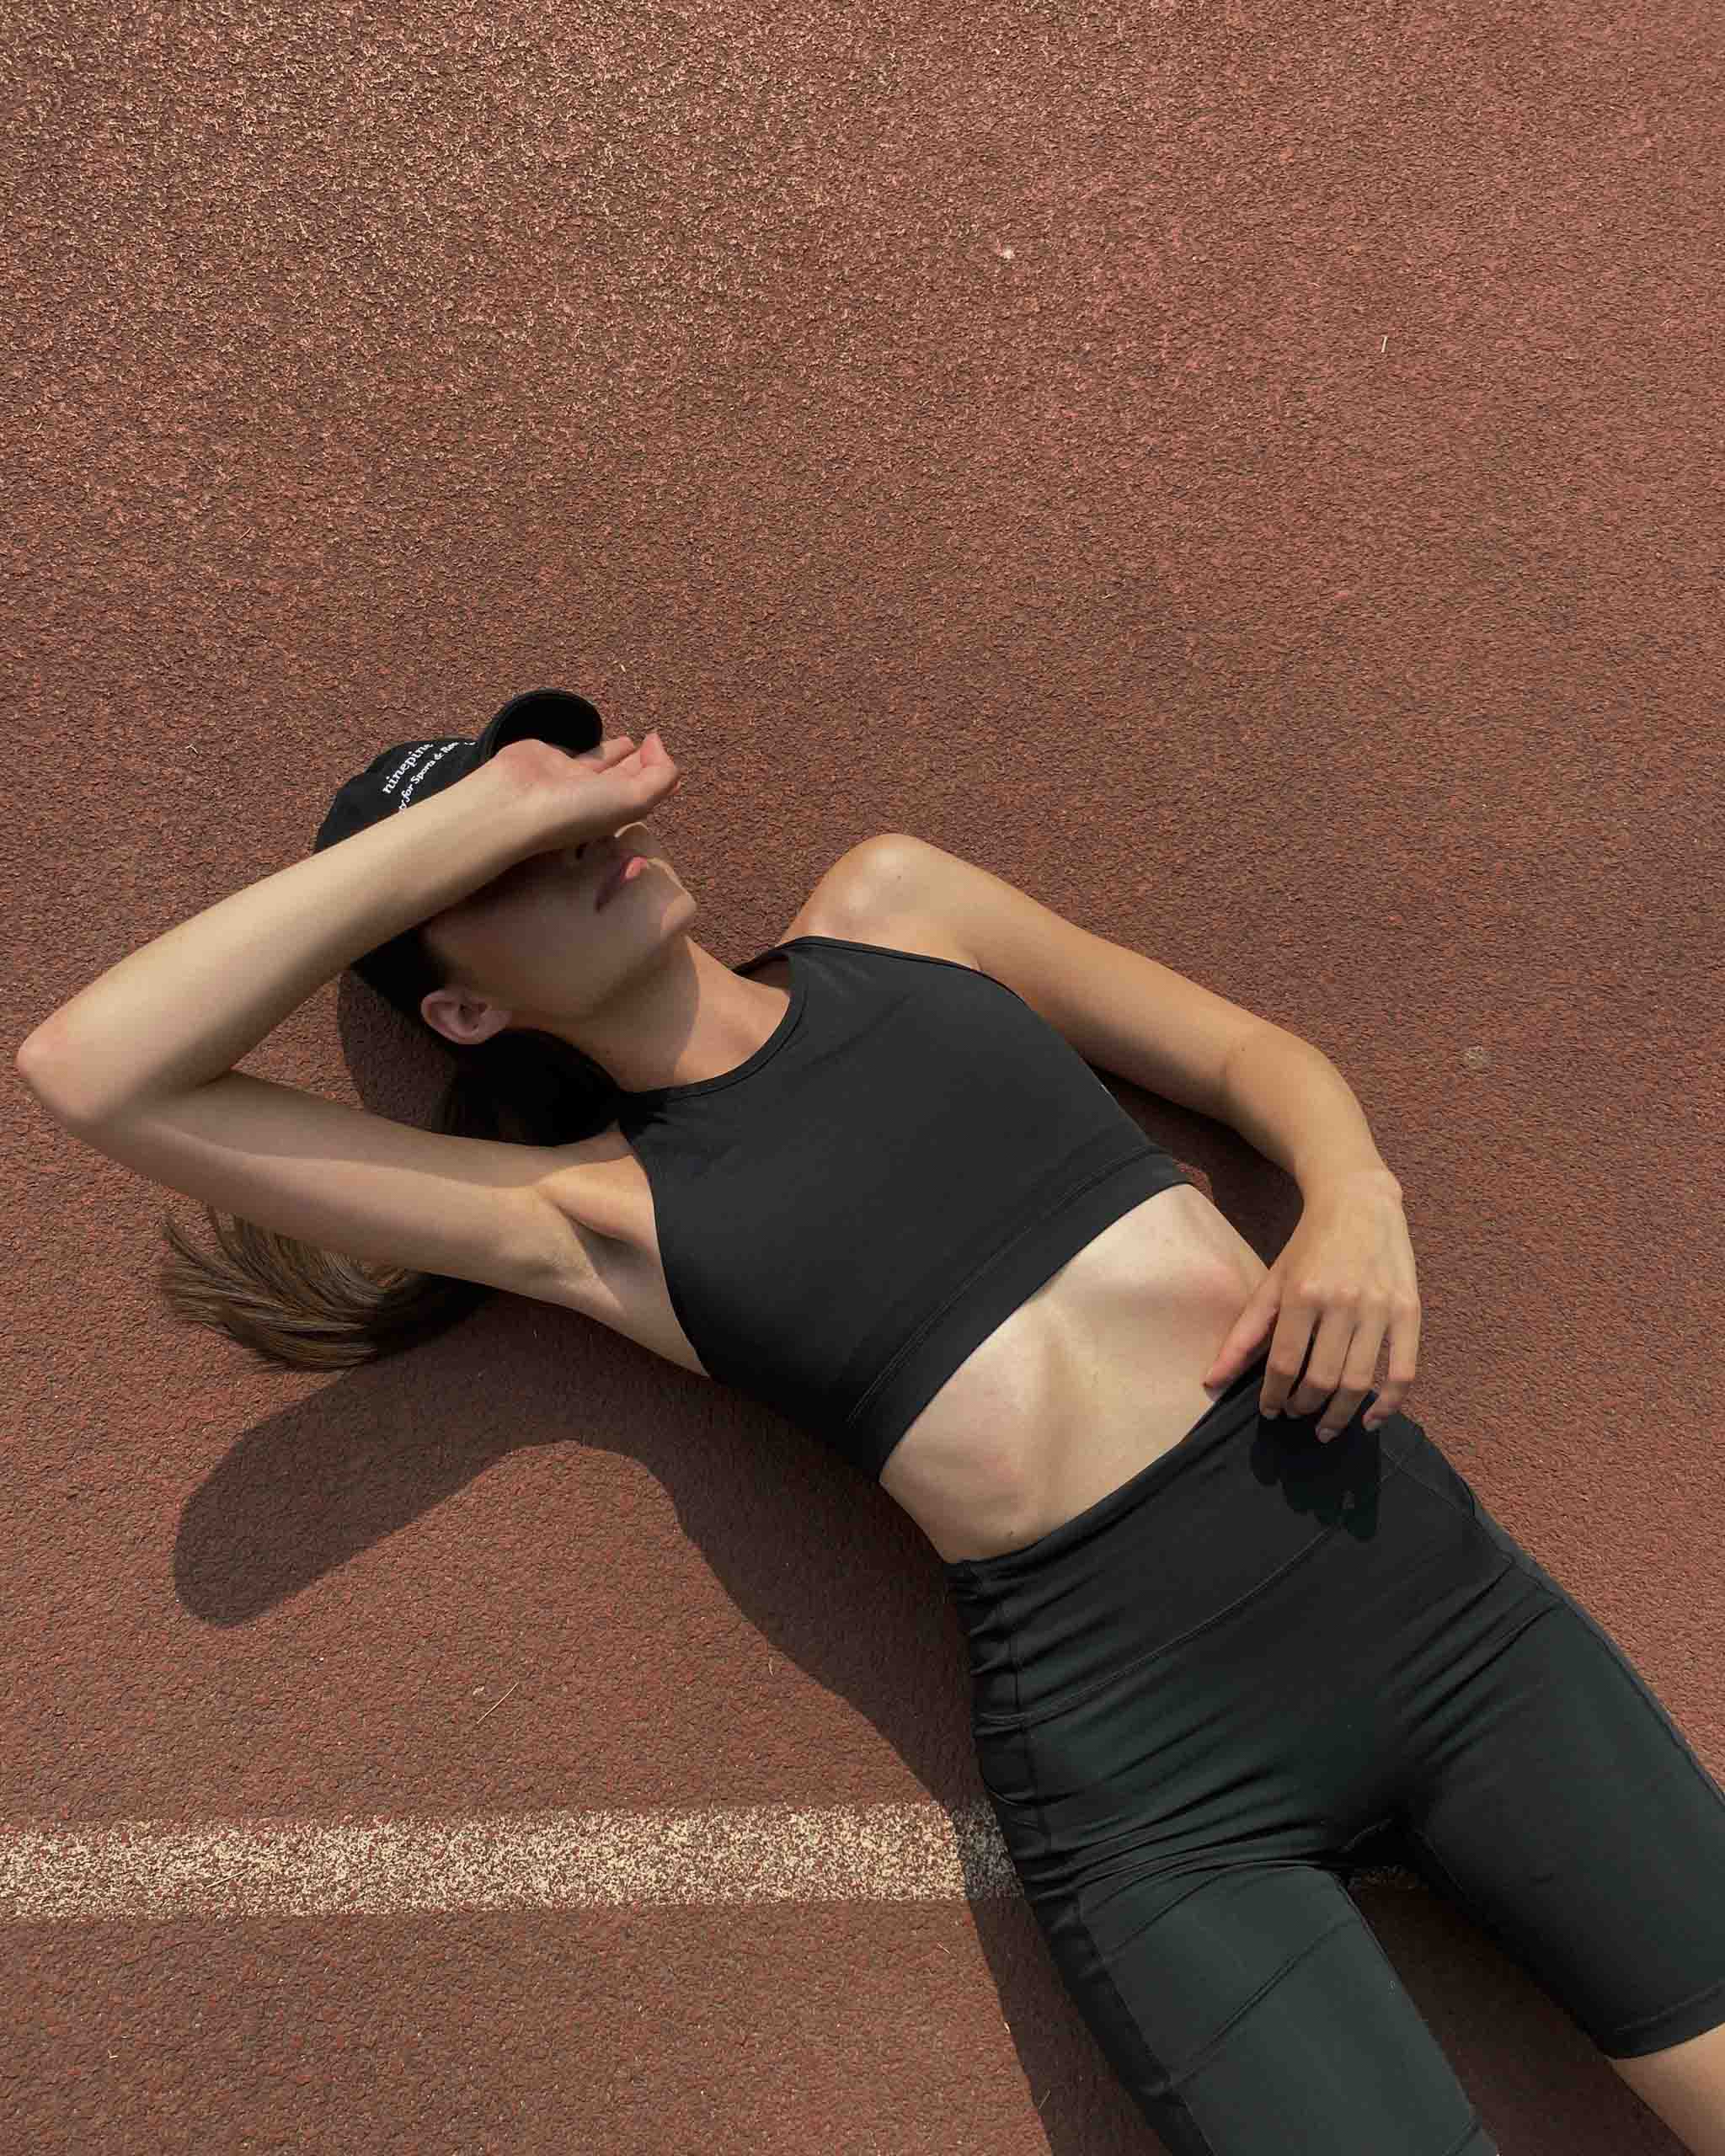 Girl in ninepine activewear set lying on back on a running track